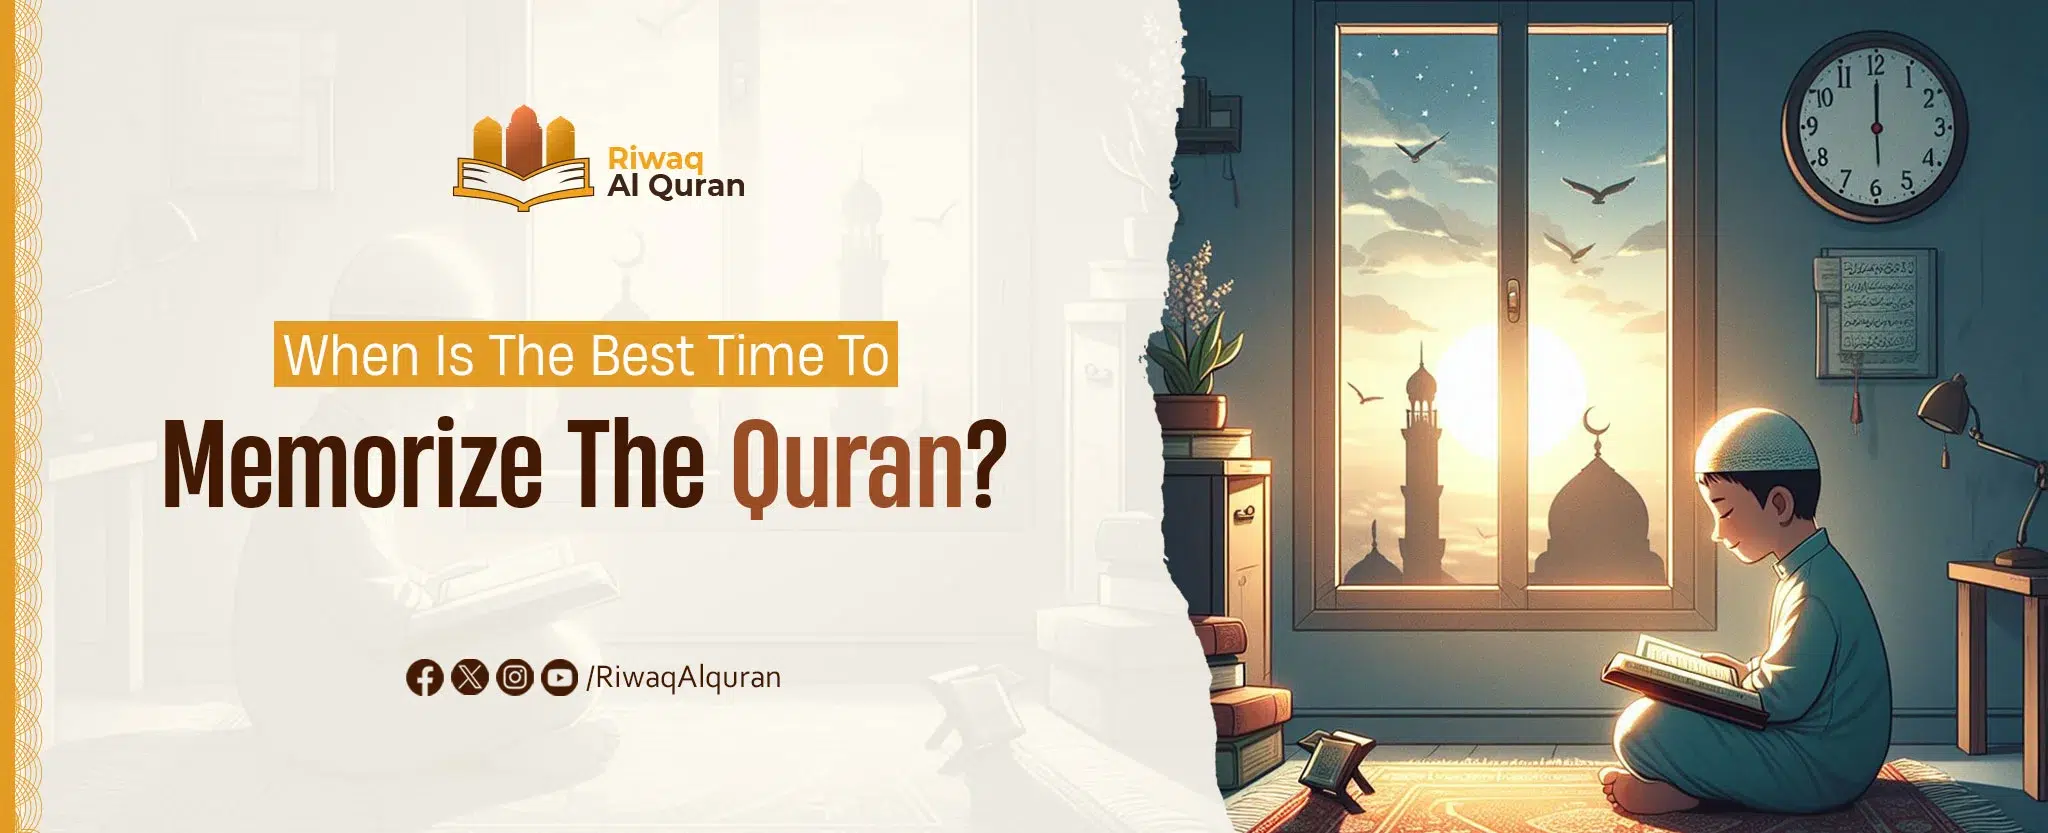 When Is The Best Time To Memorize The Quran?